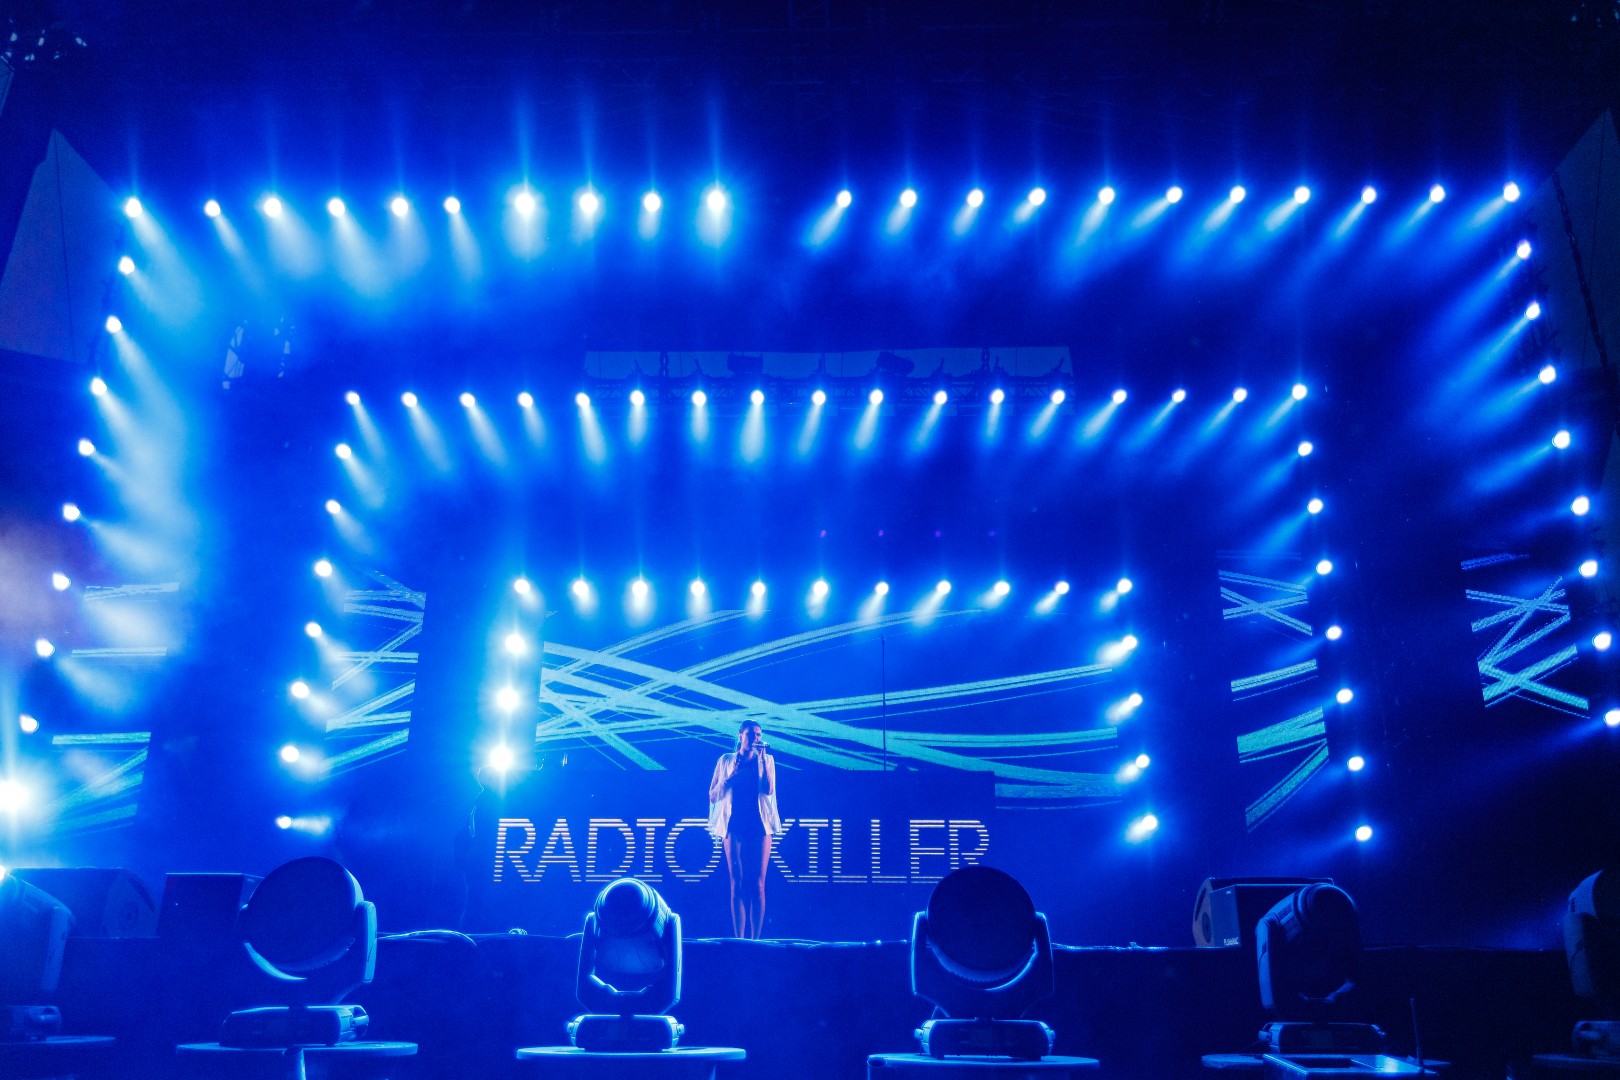 Radio Killer at Cluj Arena in Cluj-Napoca on August 2, 2015 (e0353bcec5)